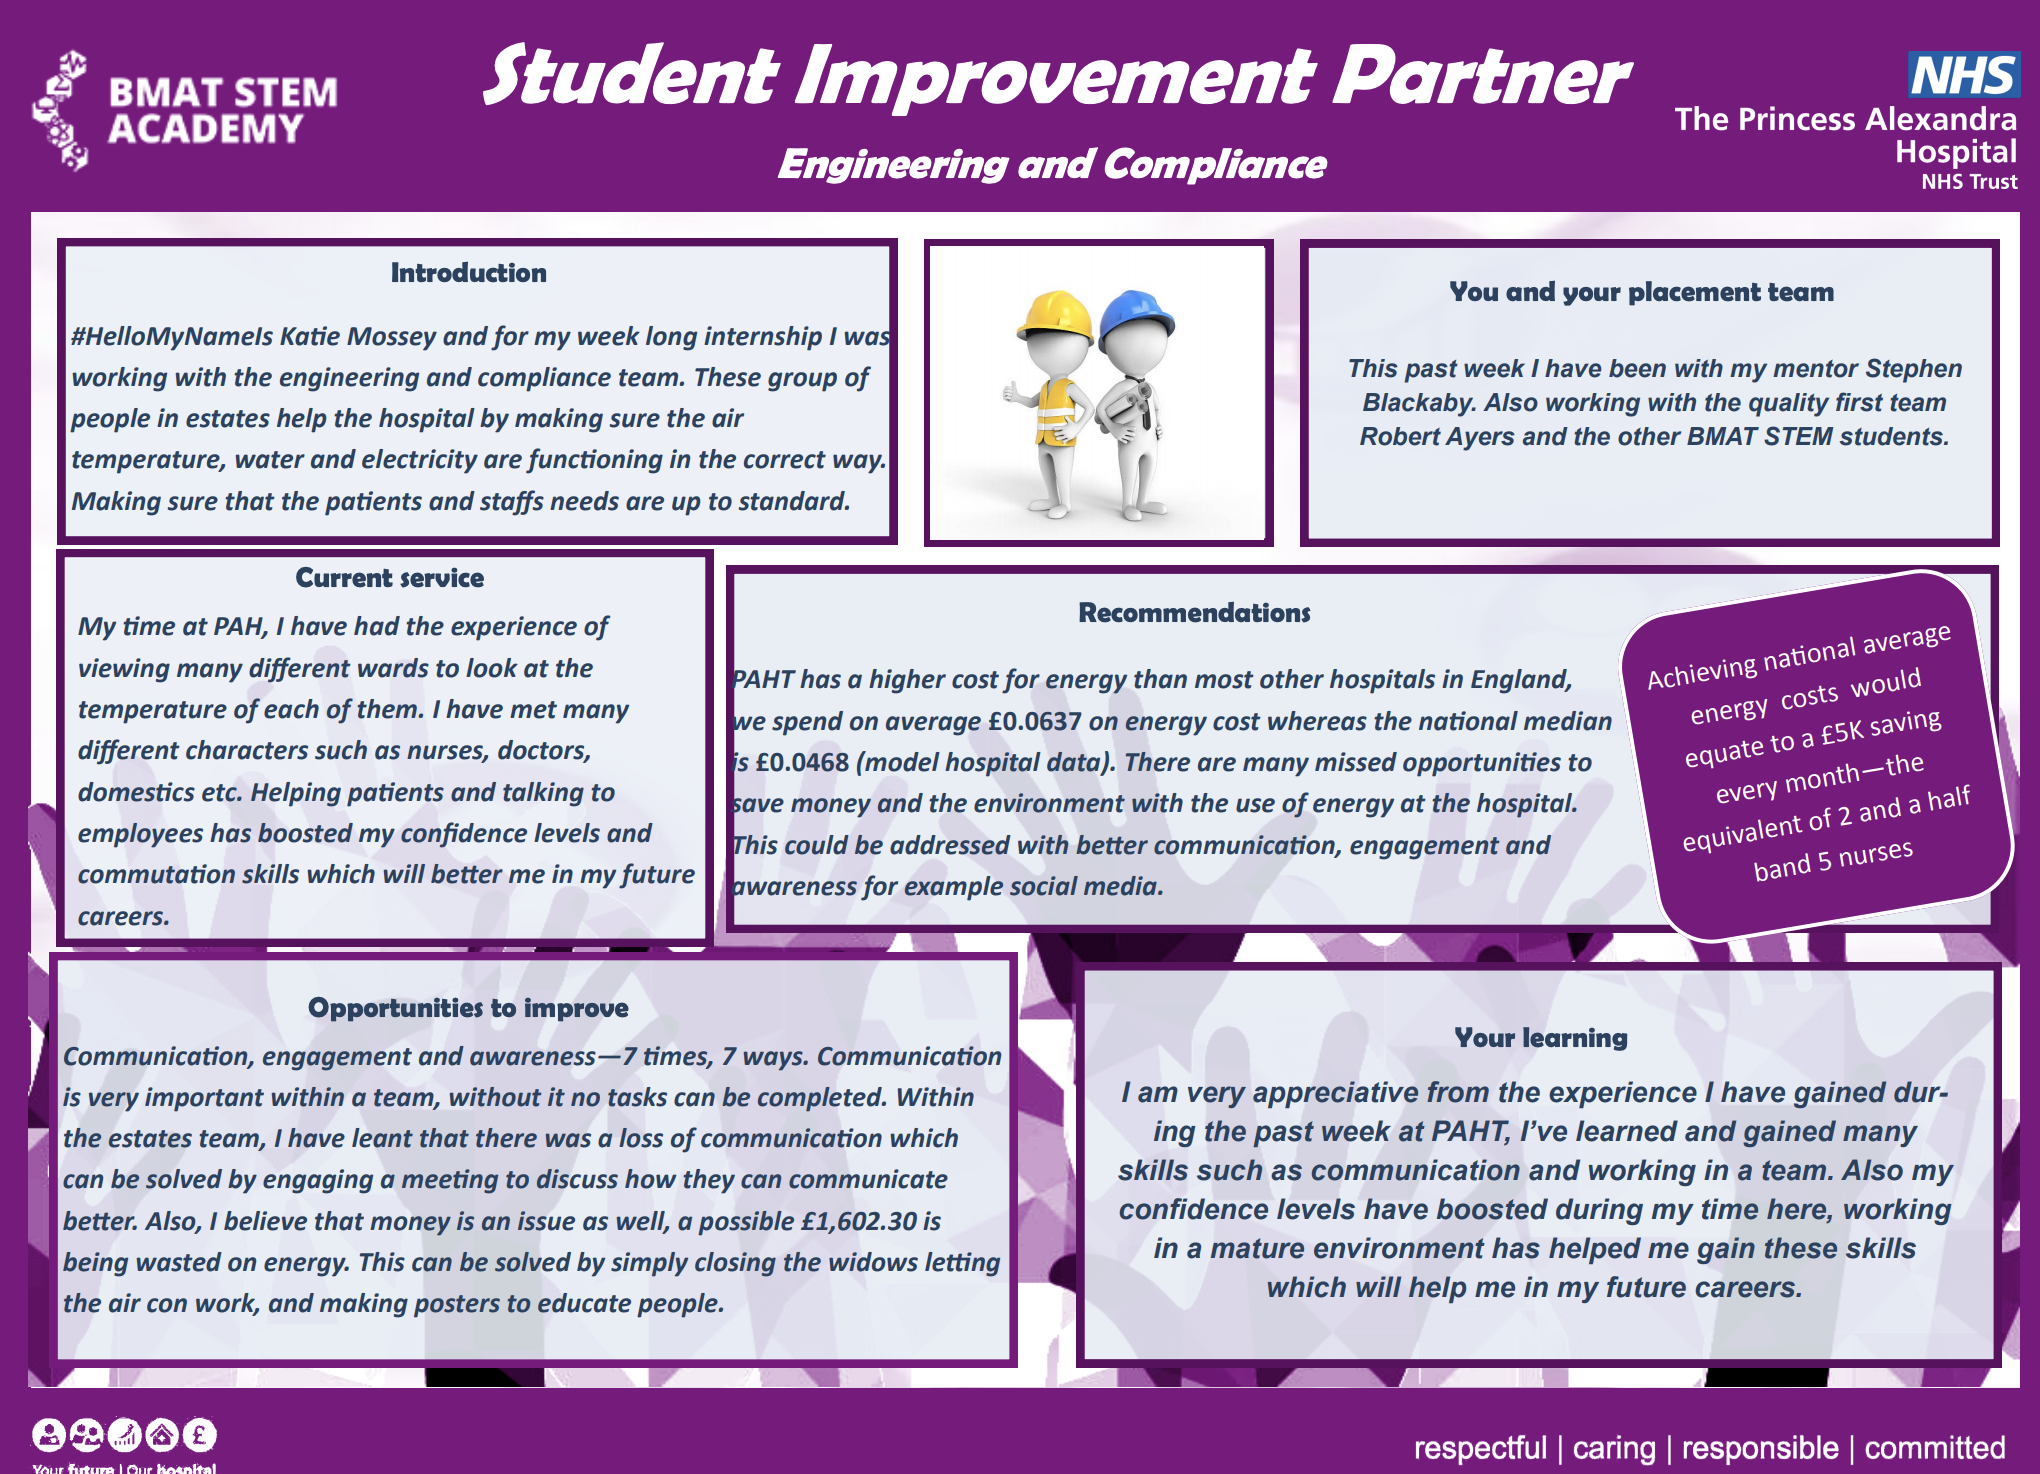 PAHT - Student Improvement Partners - The Hub team - Lucy Cox - @QualityFirstPAH featured image